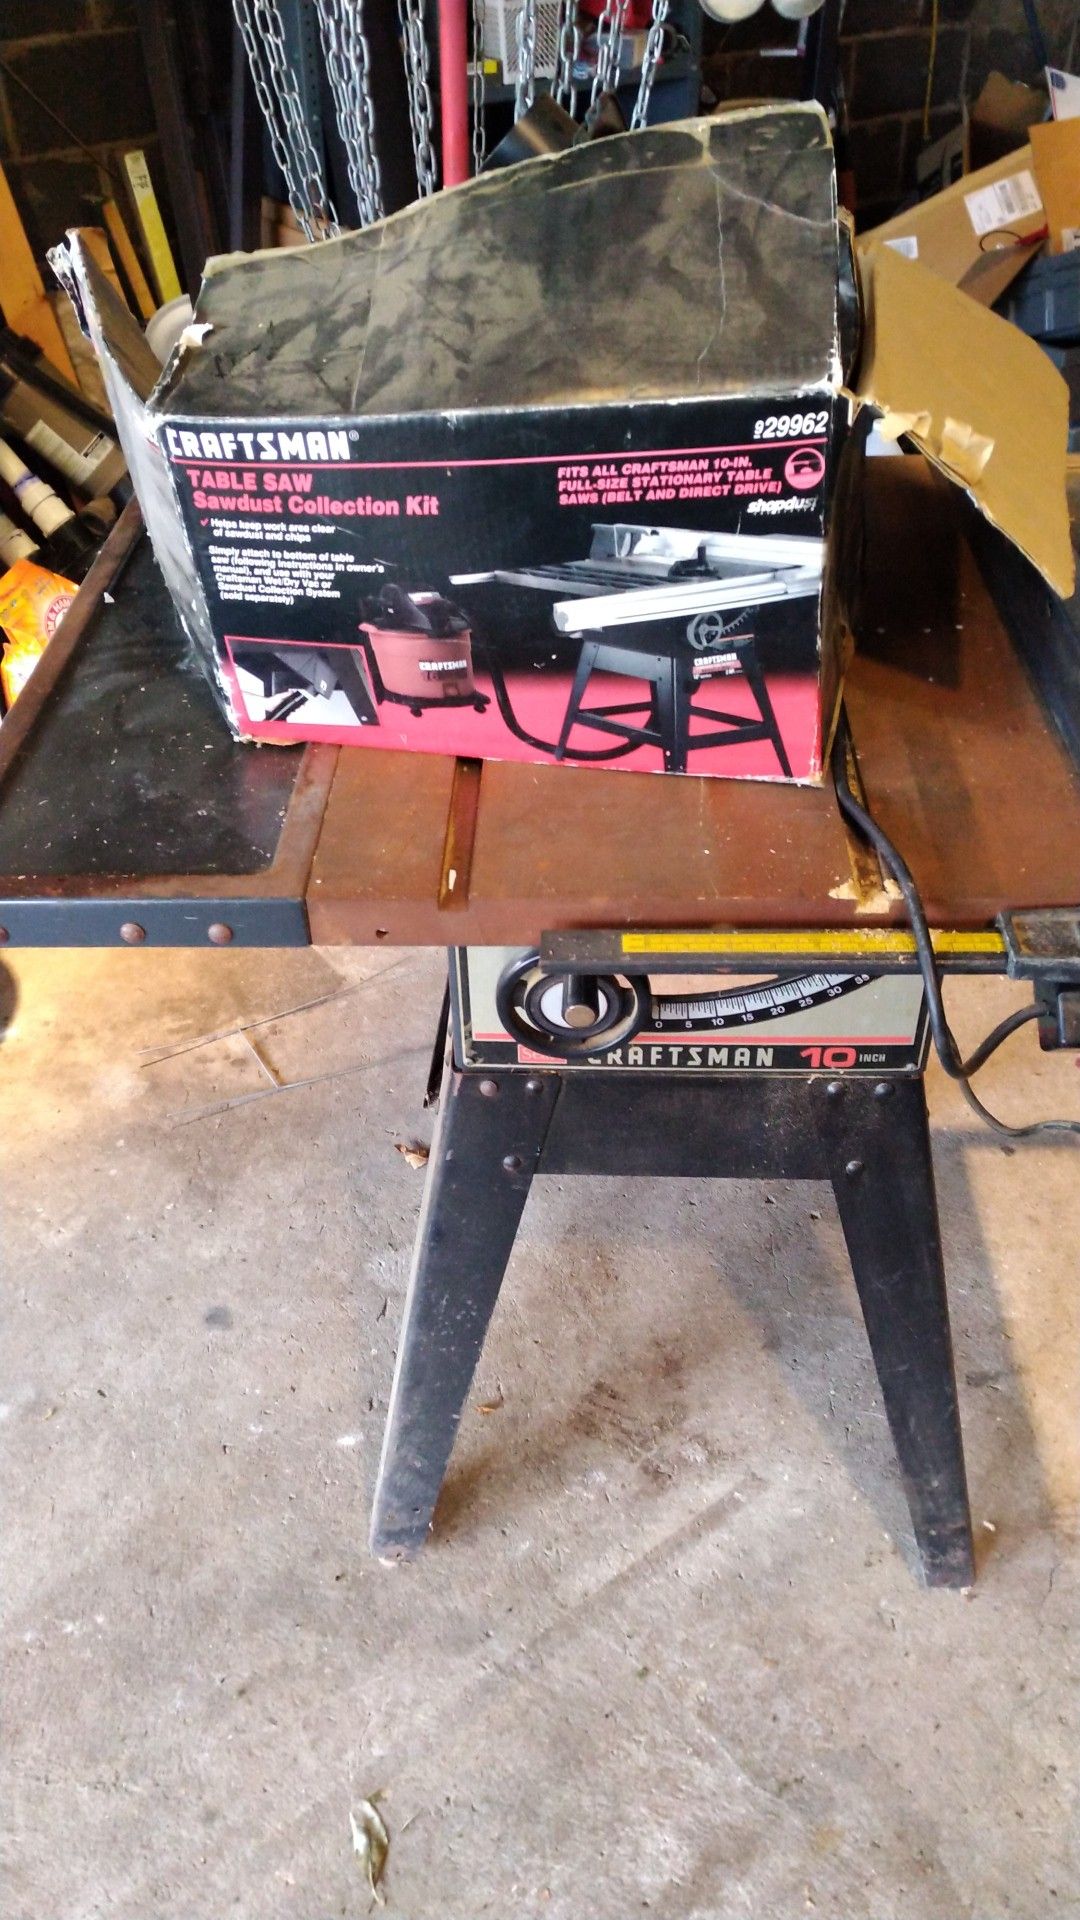 Sears Craftsman 10 inch table saw with dust collector